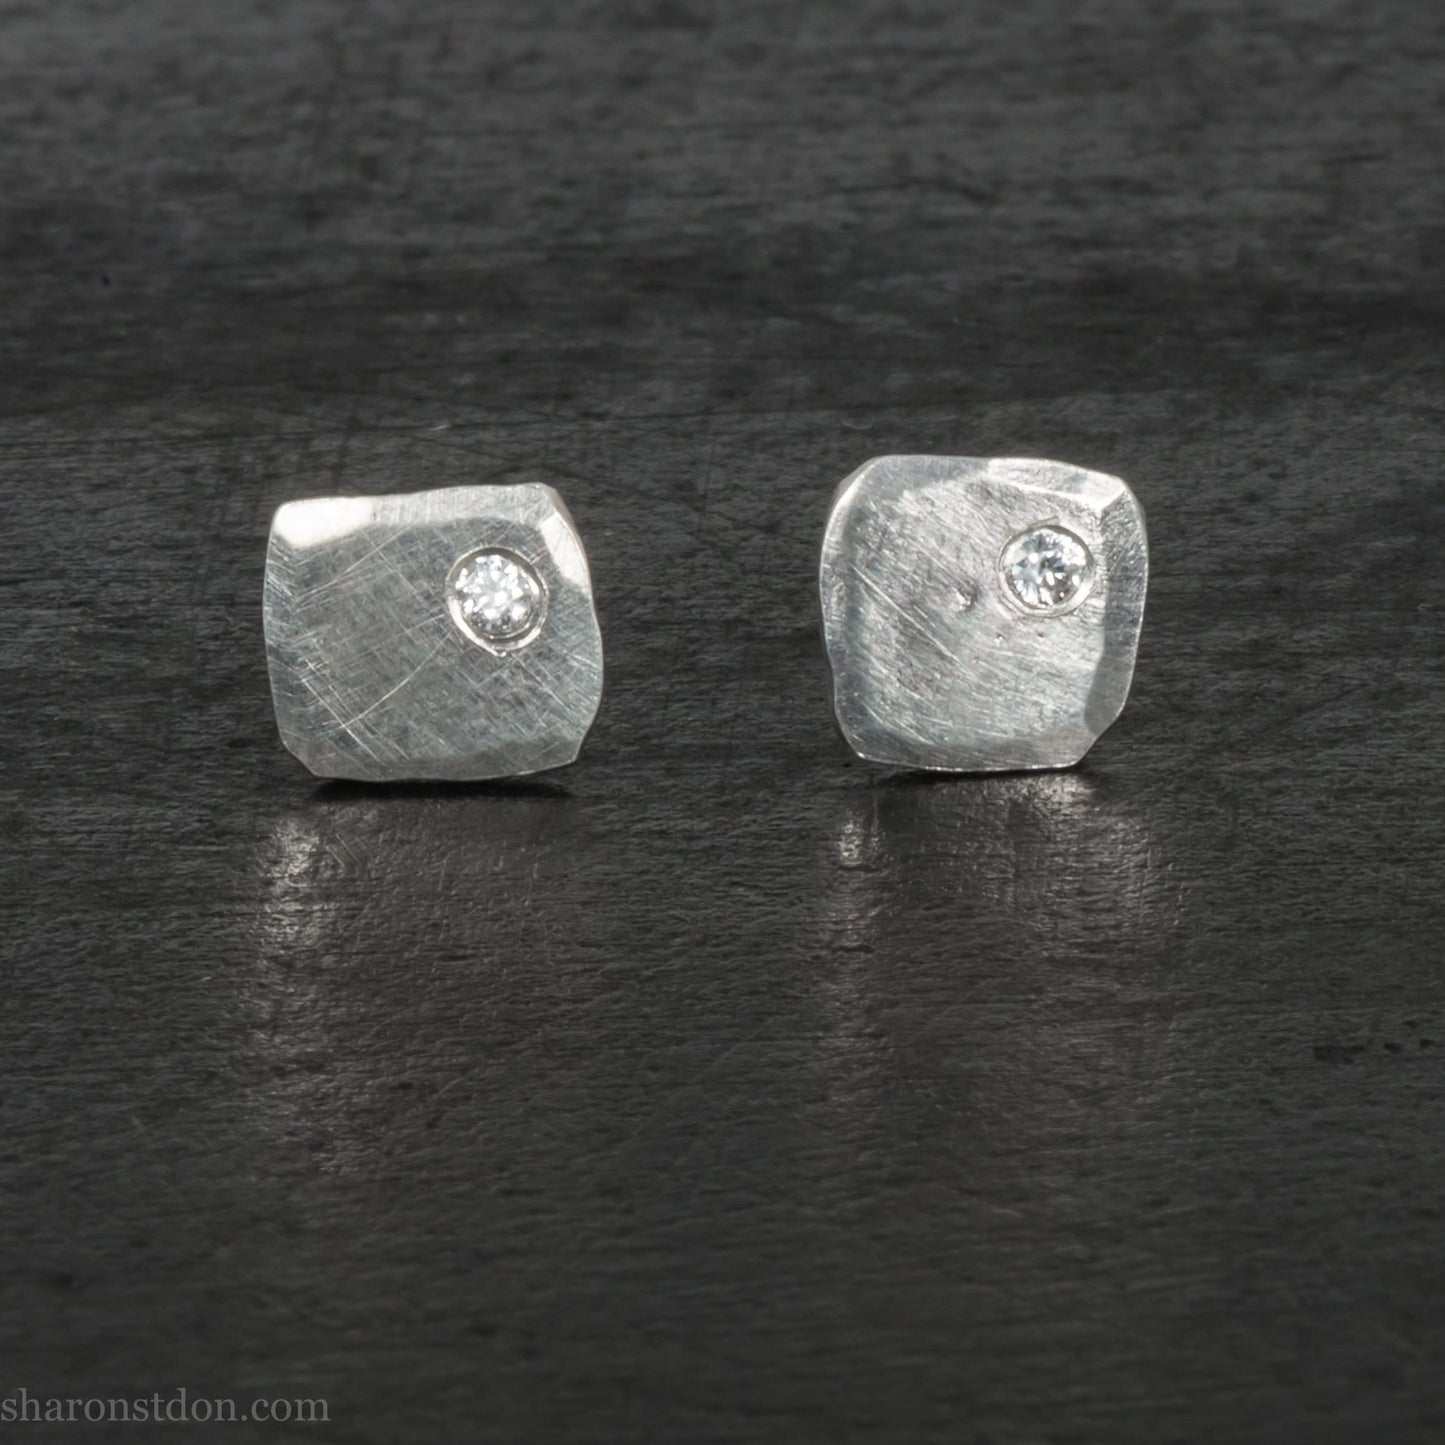 Handmade 925 sterling silver stud earrings with Canadian diamond gemstones. Small square stud earrings made by Sharon SaintDon in North America. Canadamark diamonds.